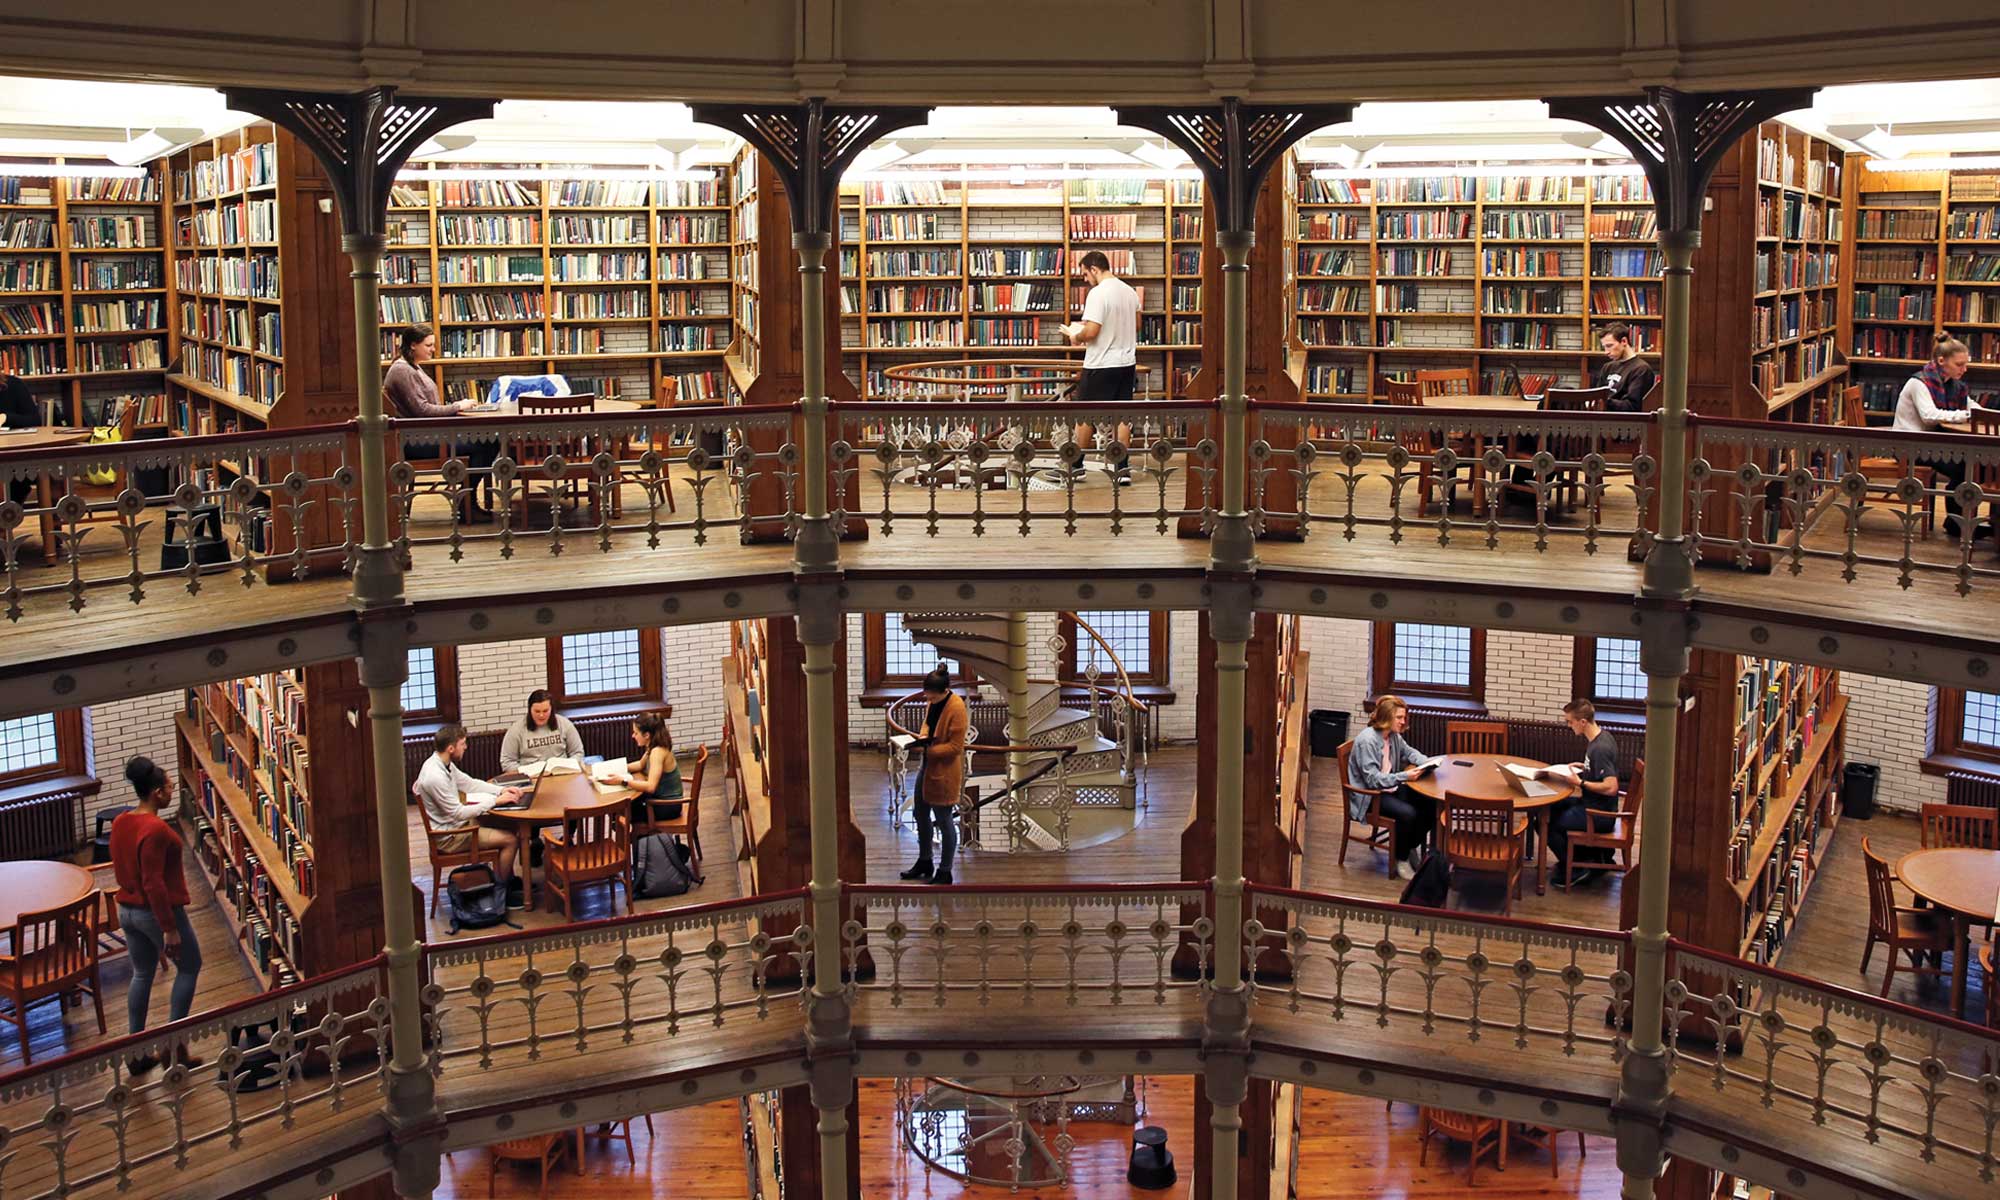 Students studying in Linderman Library rotunda